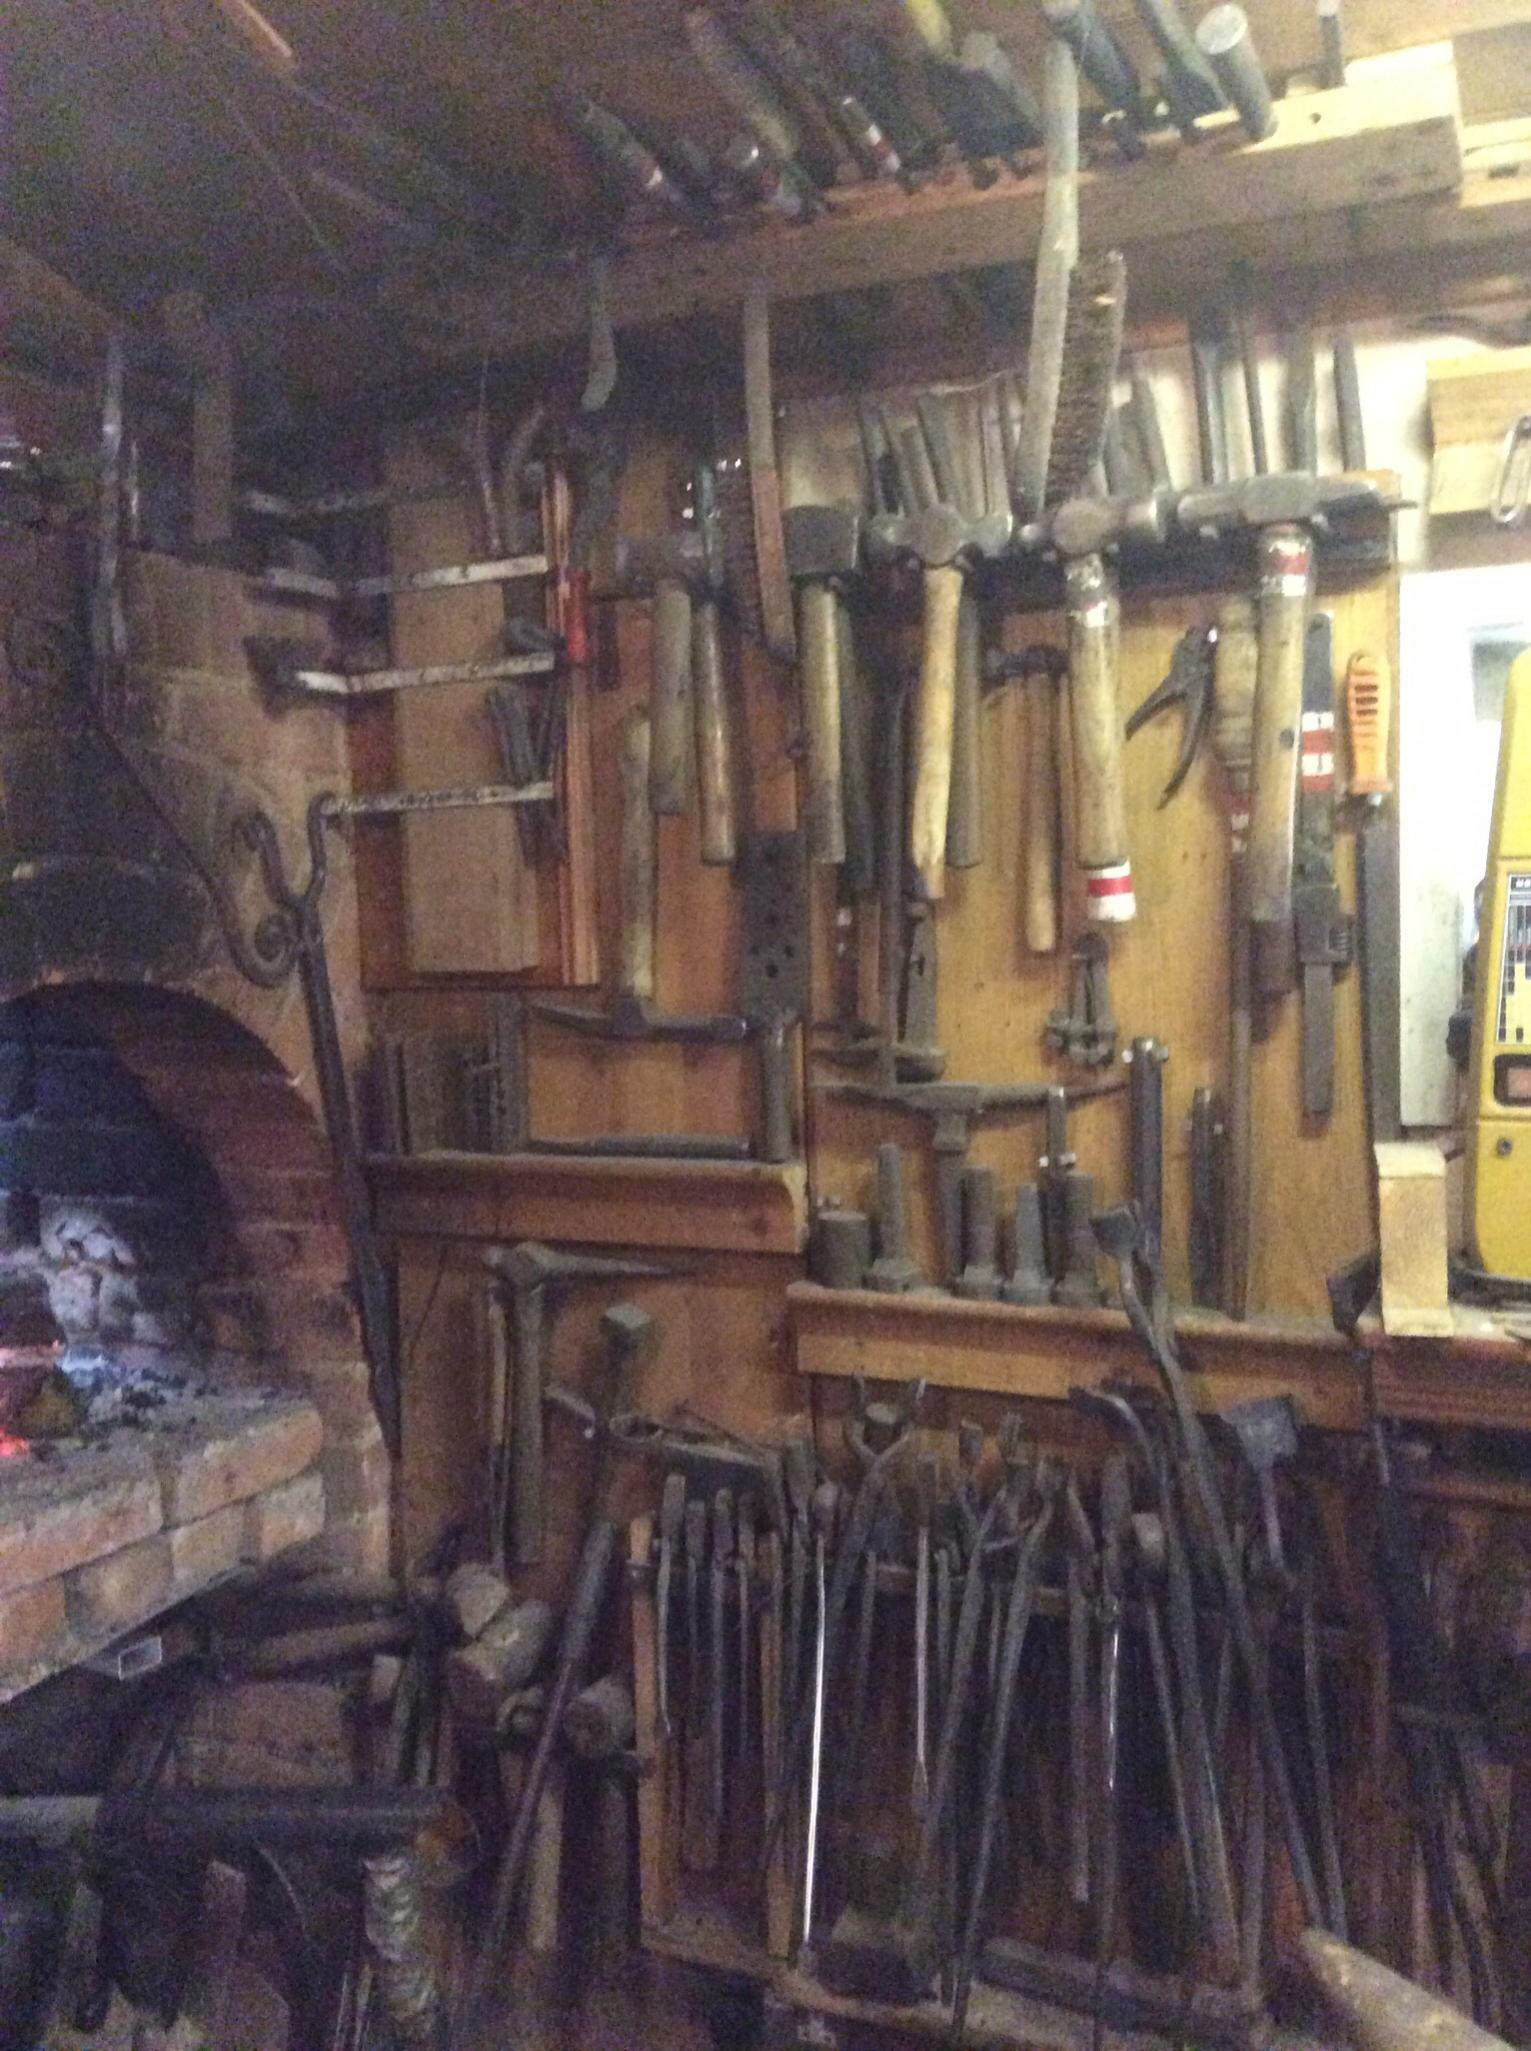 Some of my hammers,tongs & drifts